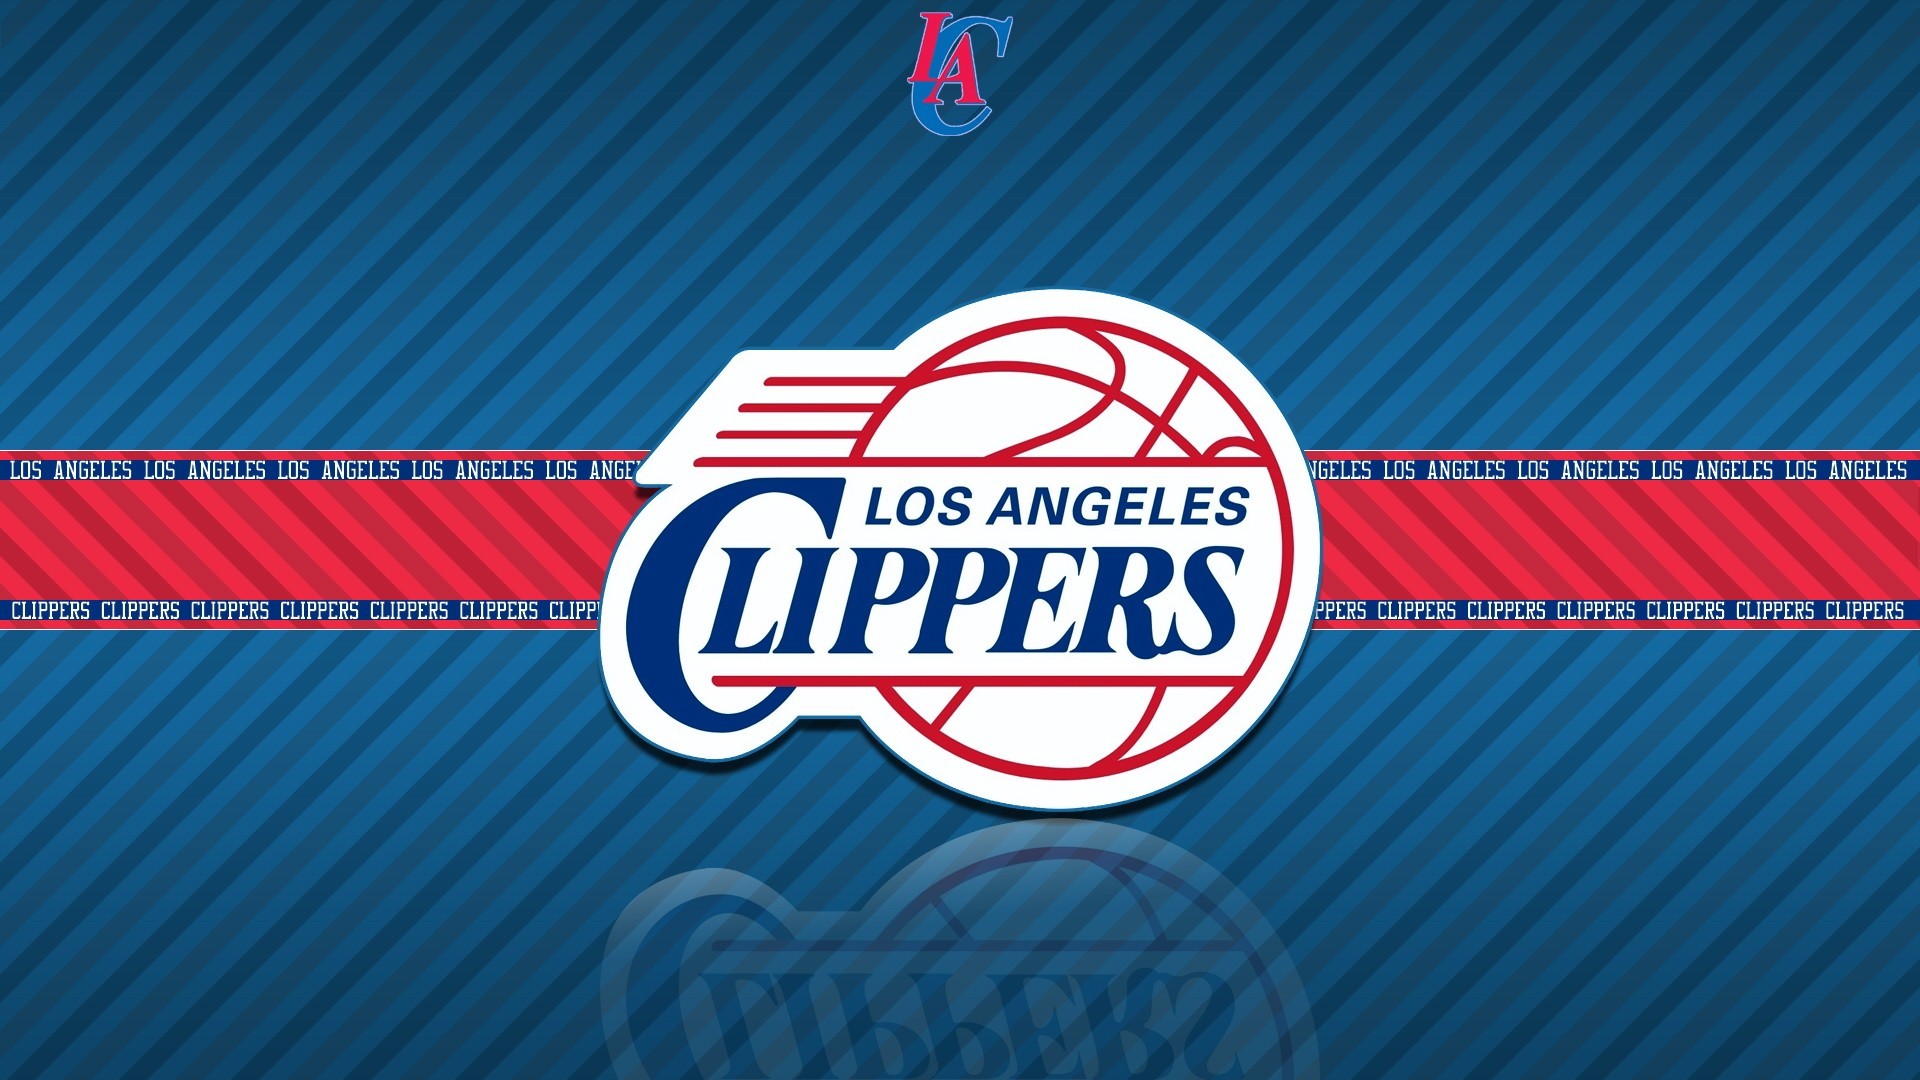 Clippers Wallpaper 2014 1920x1080